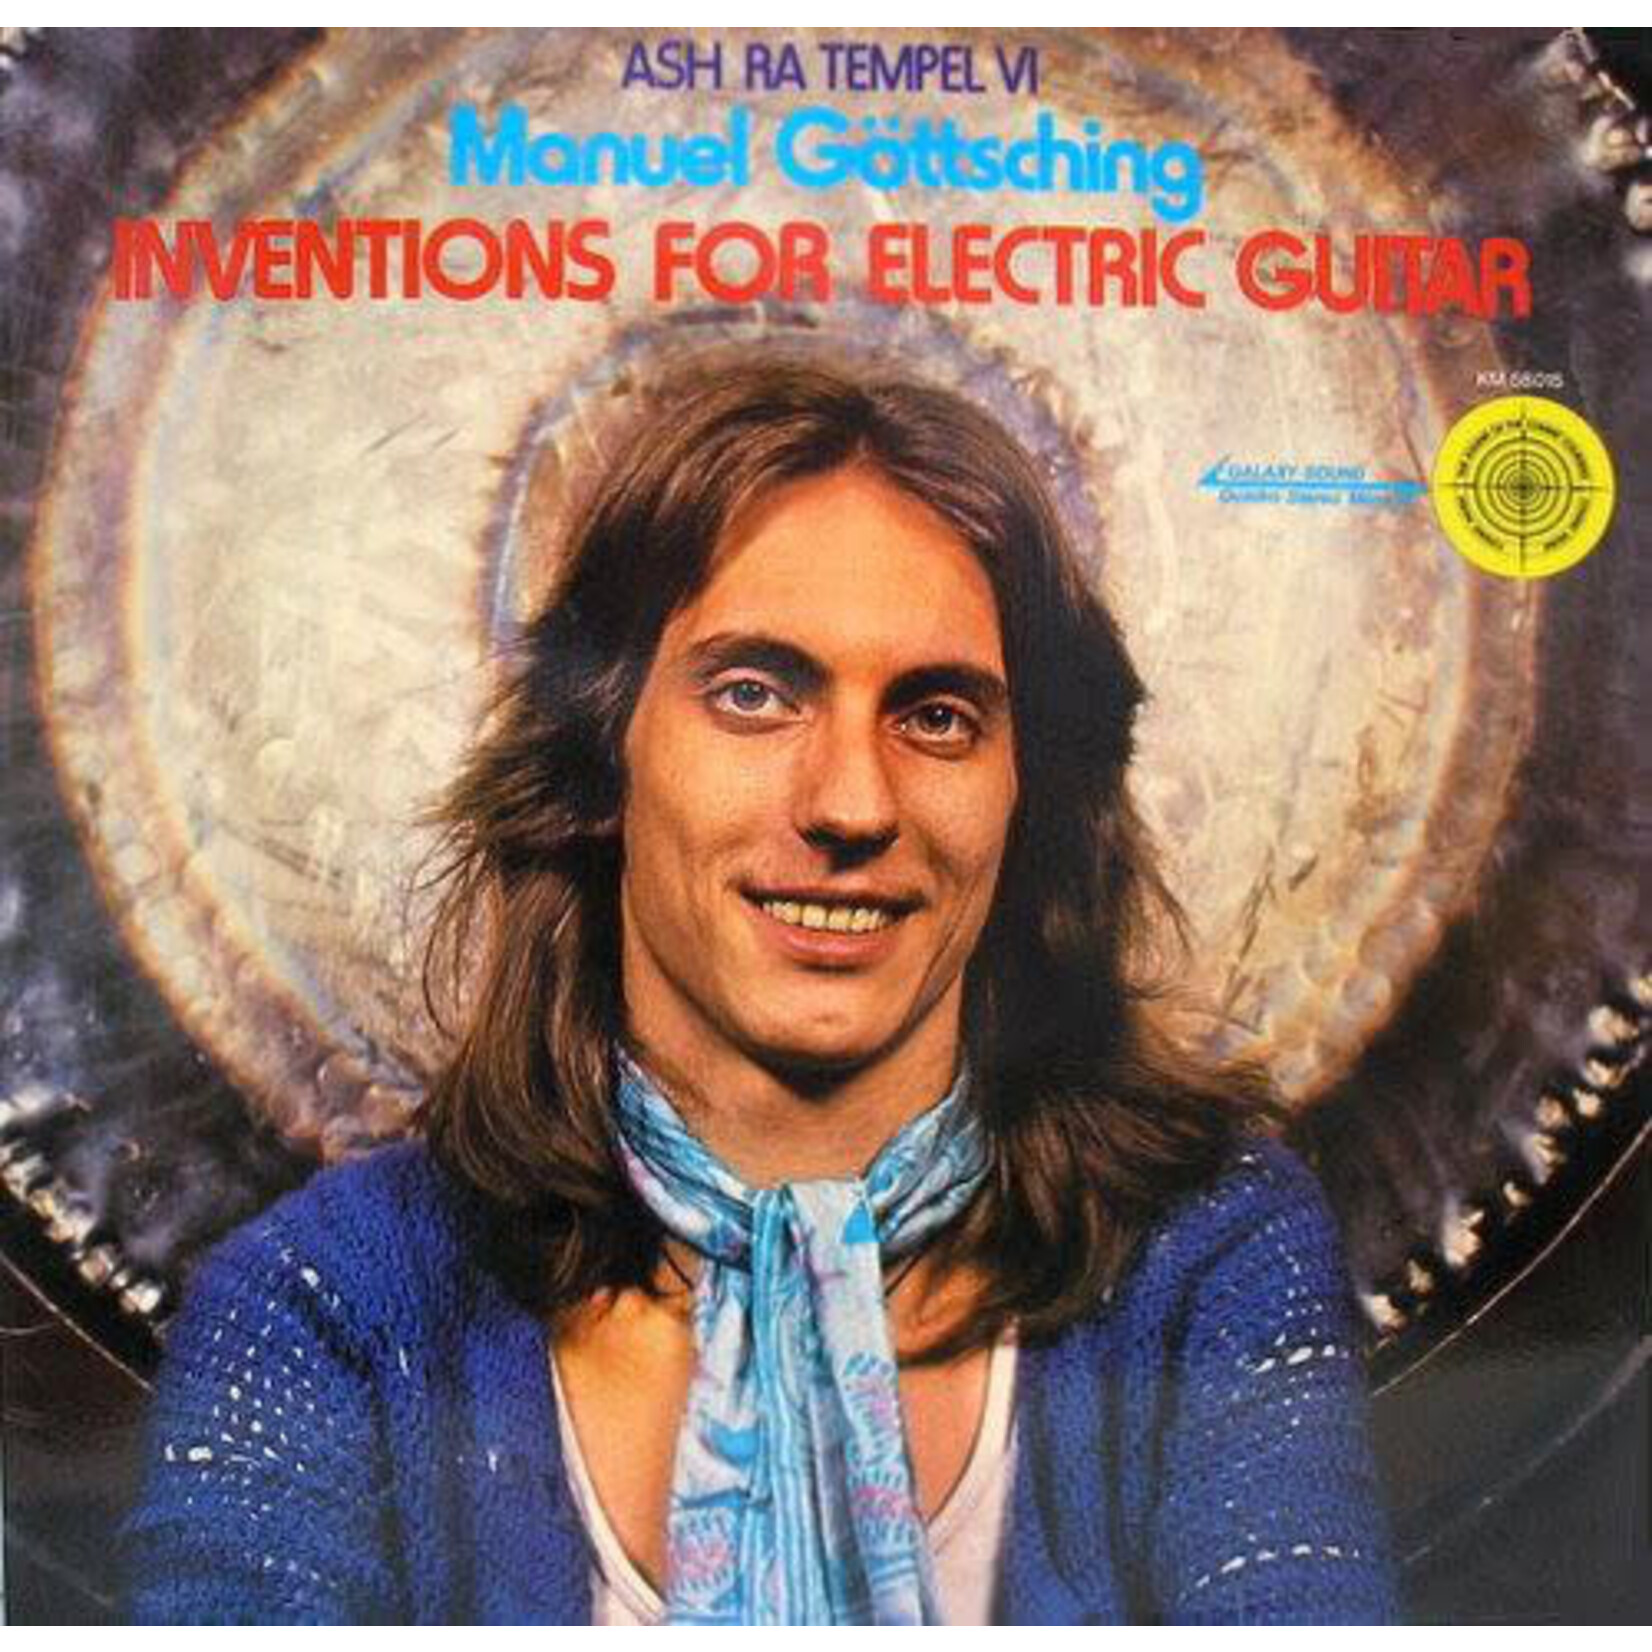 [New] Gottsching Manuel: Inventions For Electric Guitar [MG.ART]